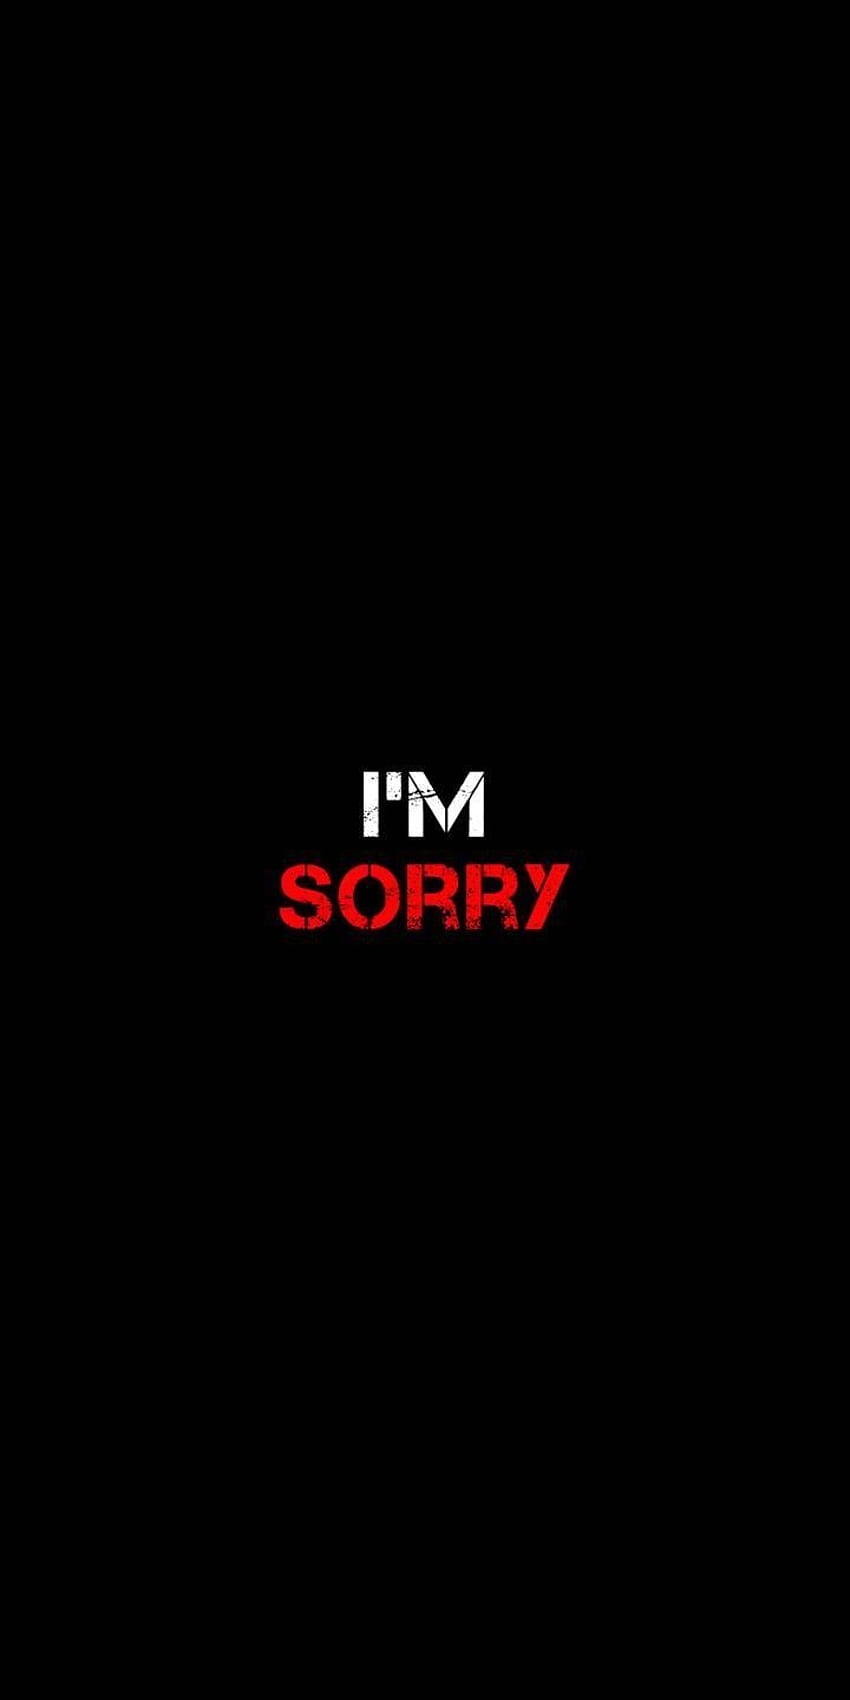 Sorry Images Photos Pics  HD Wallpapers Download